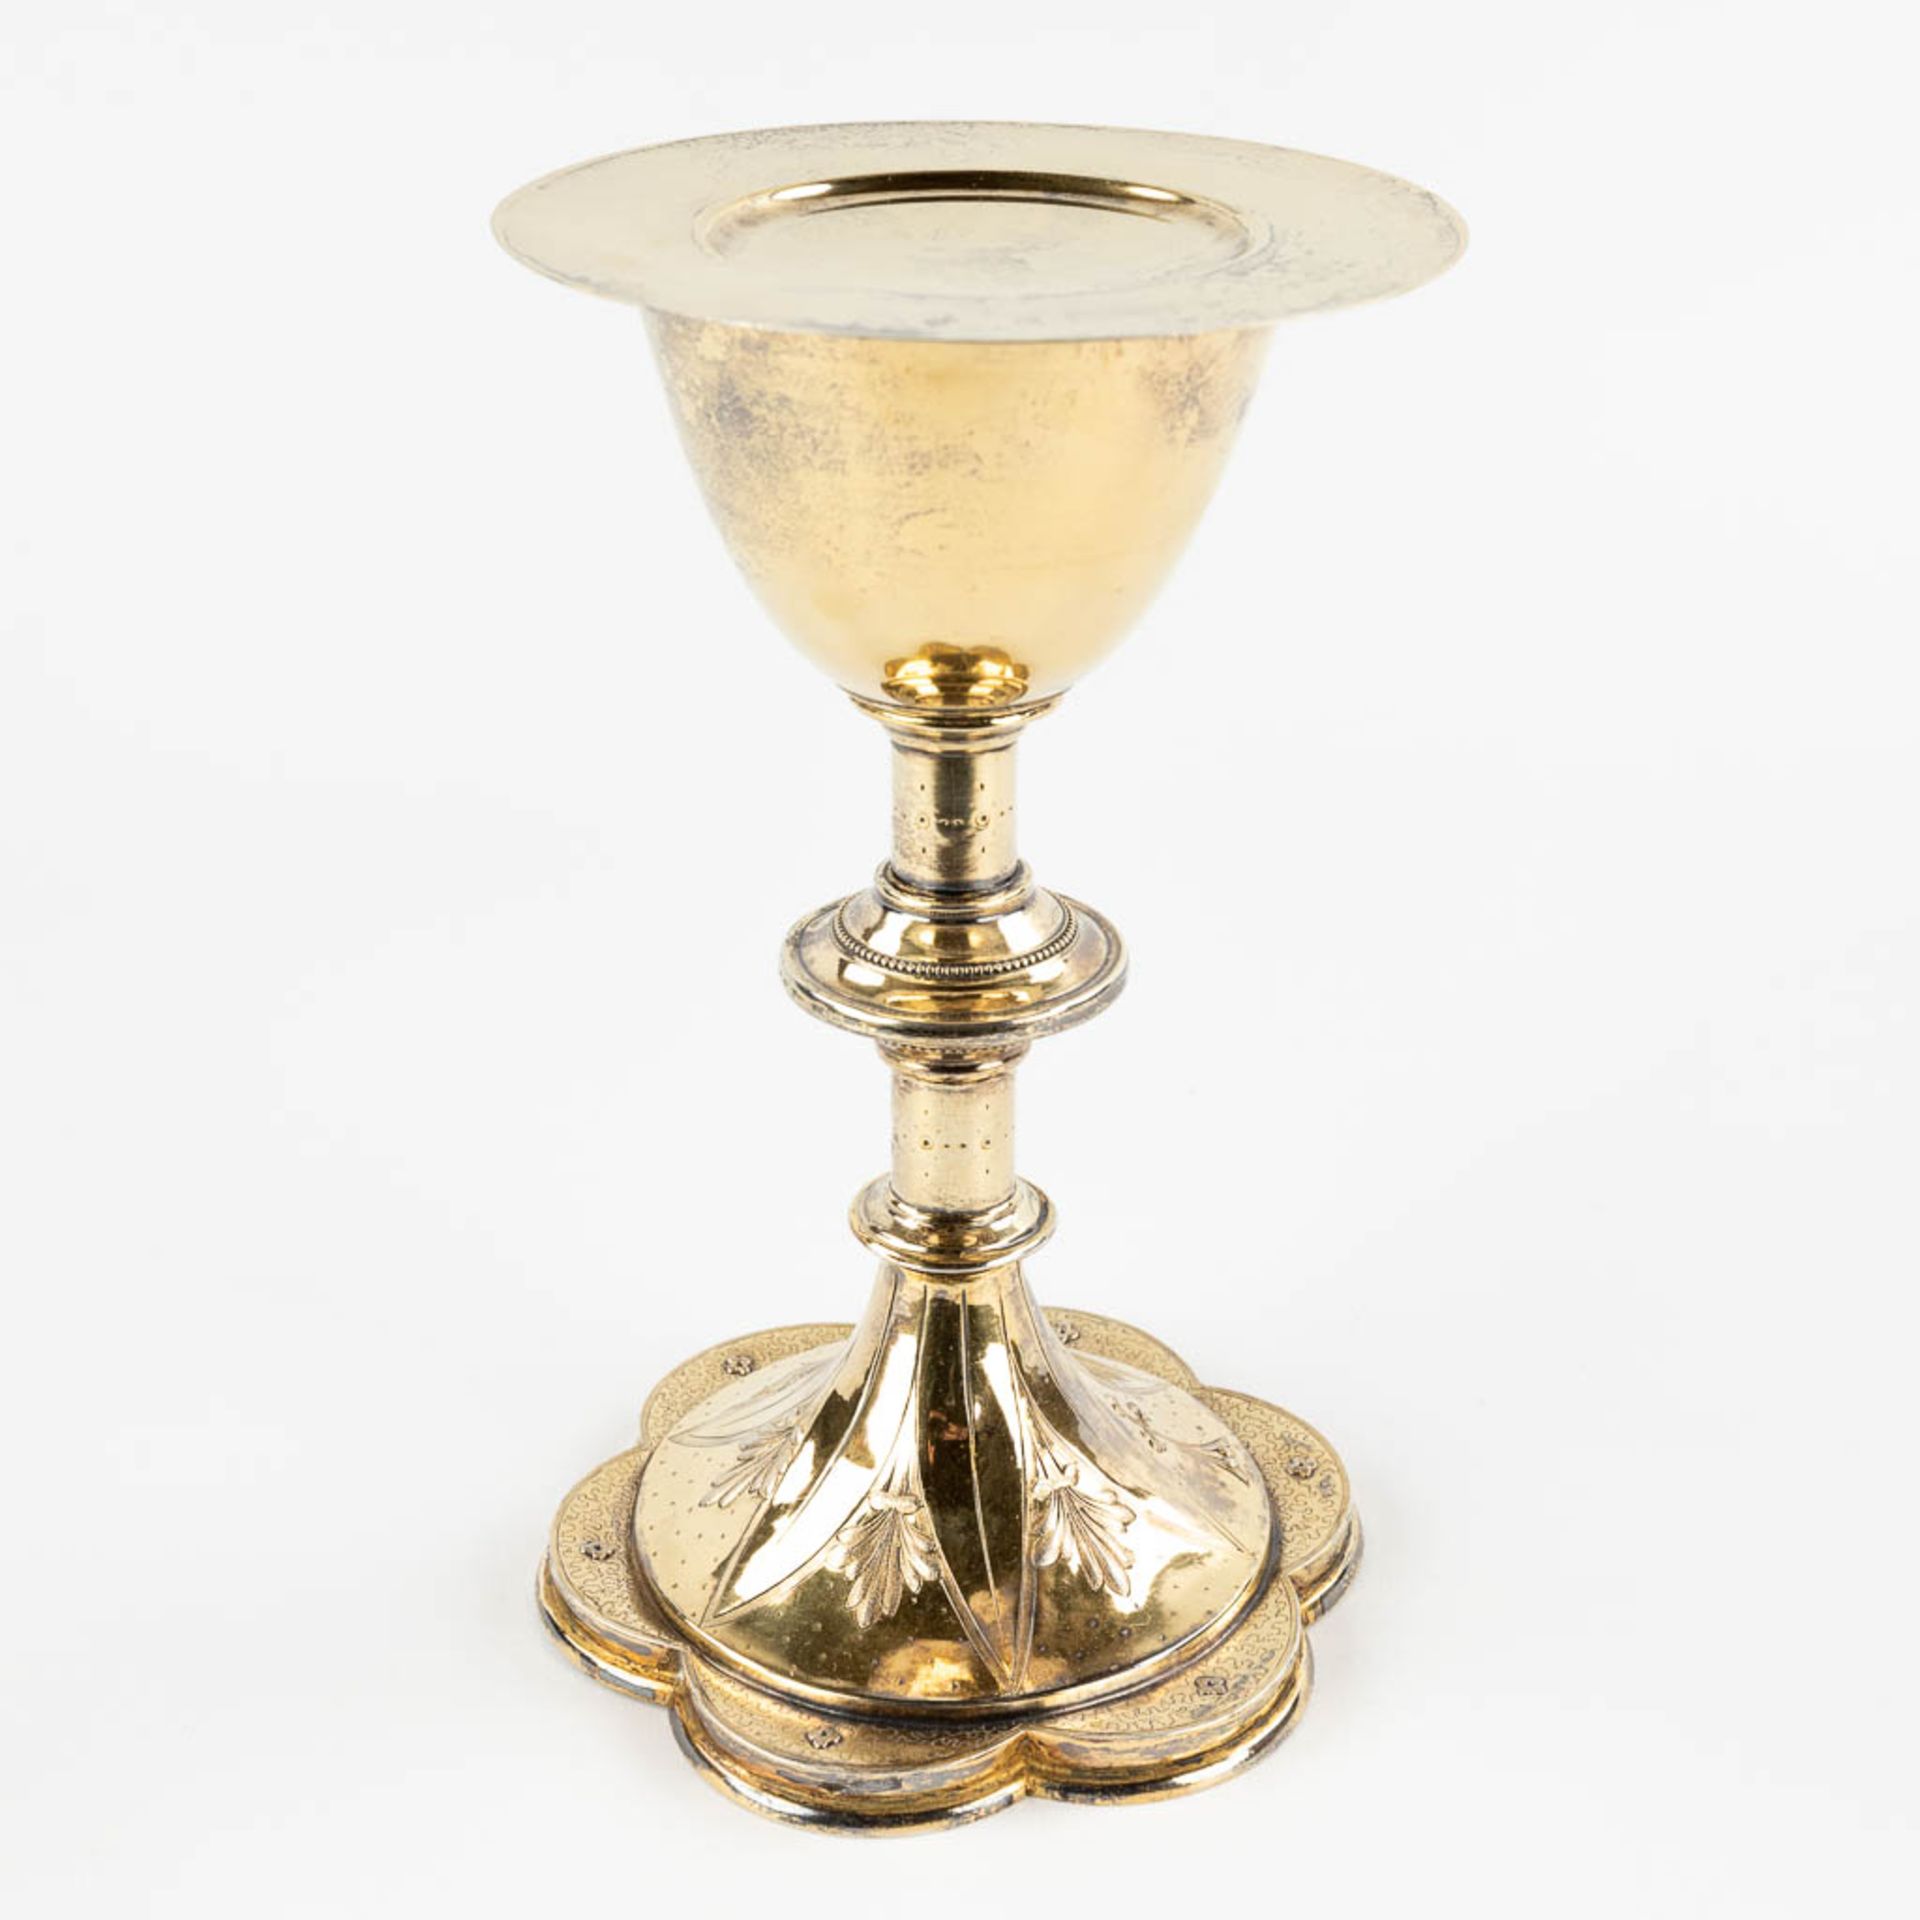 A Chalice with paten, gilt silver in gothic revival style. 305g. (H:19,5 x D:12,5 cm) - Image 4 of 16